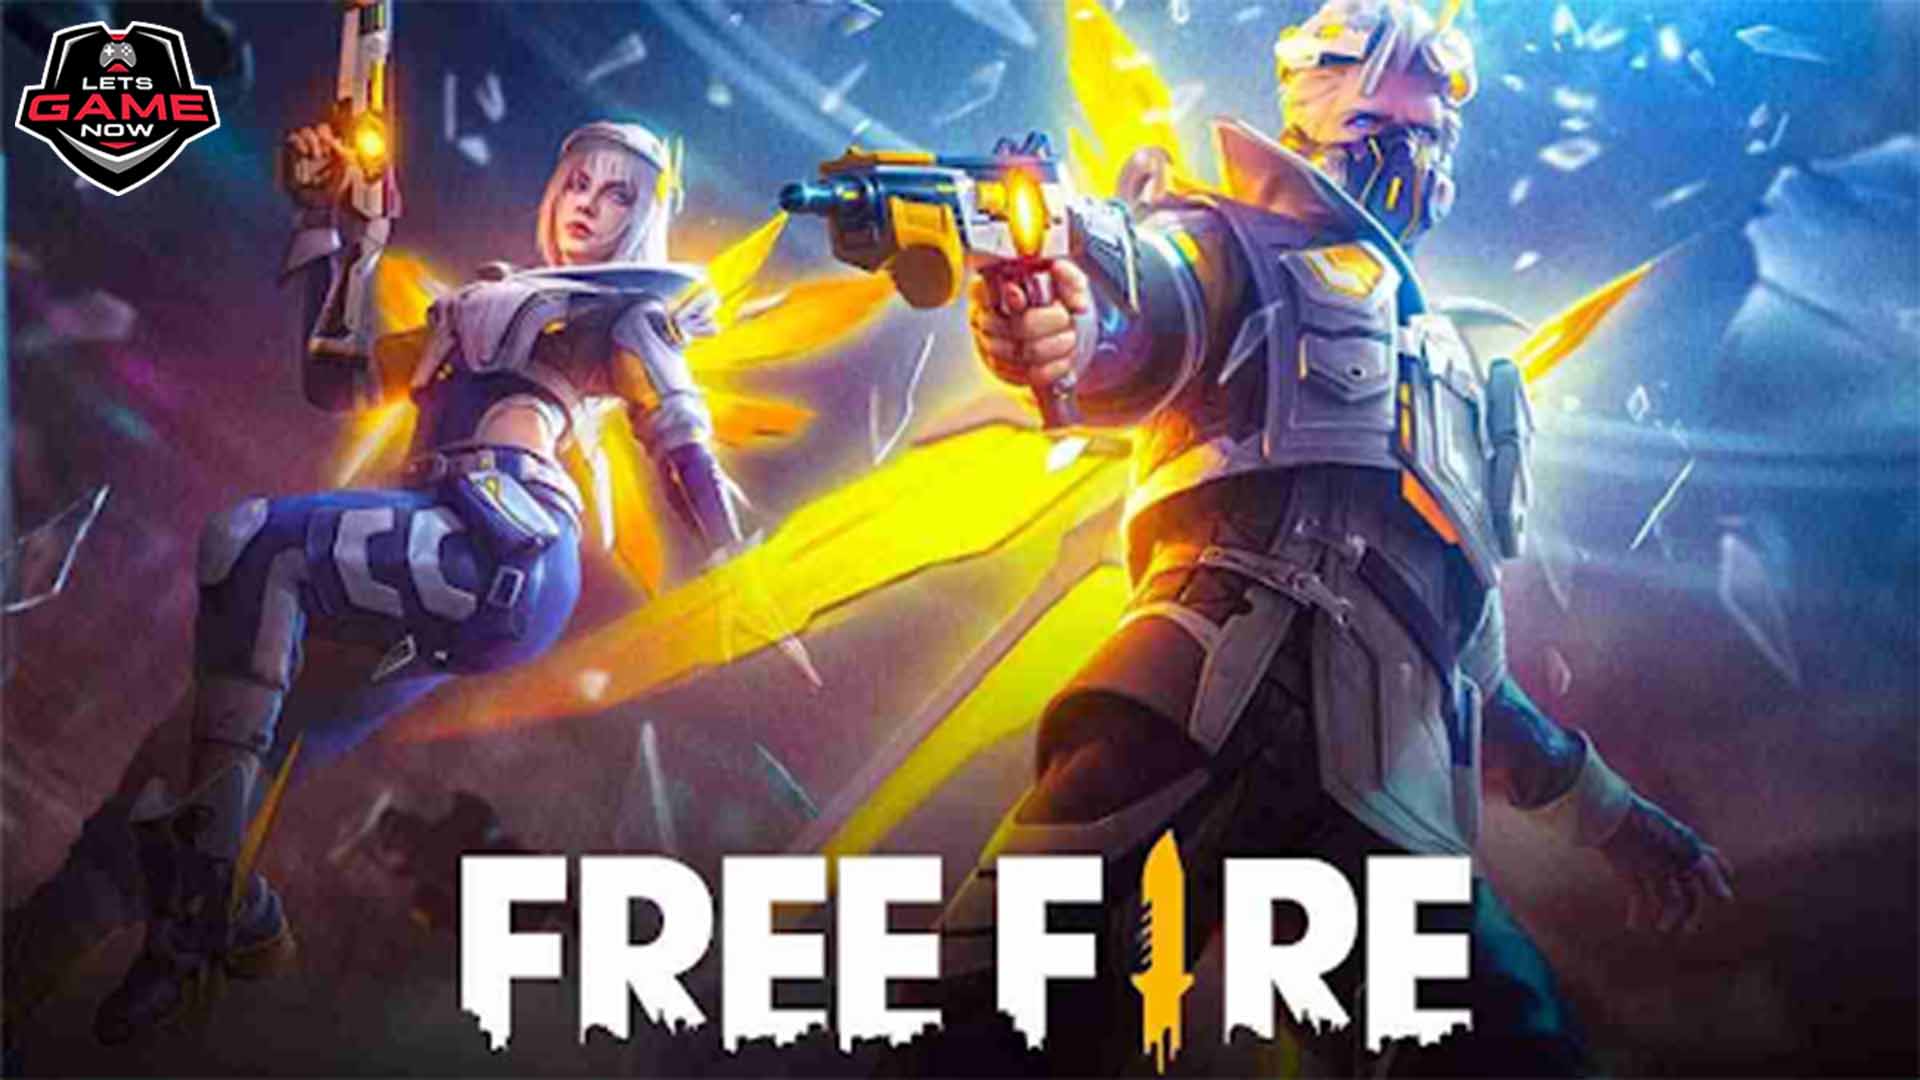 Free Fire was the most downloaded mobile game of January 2022, with ...